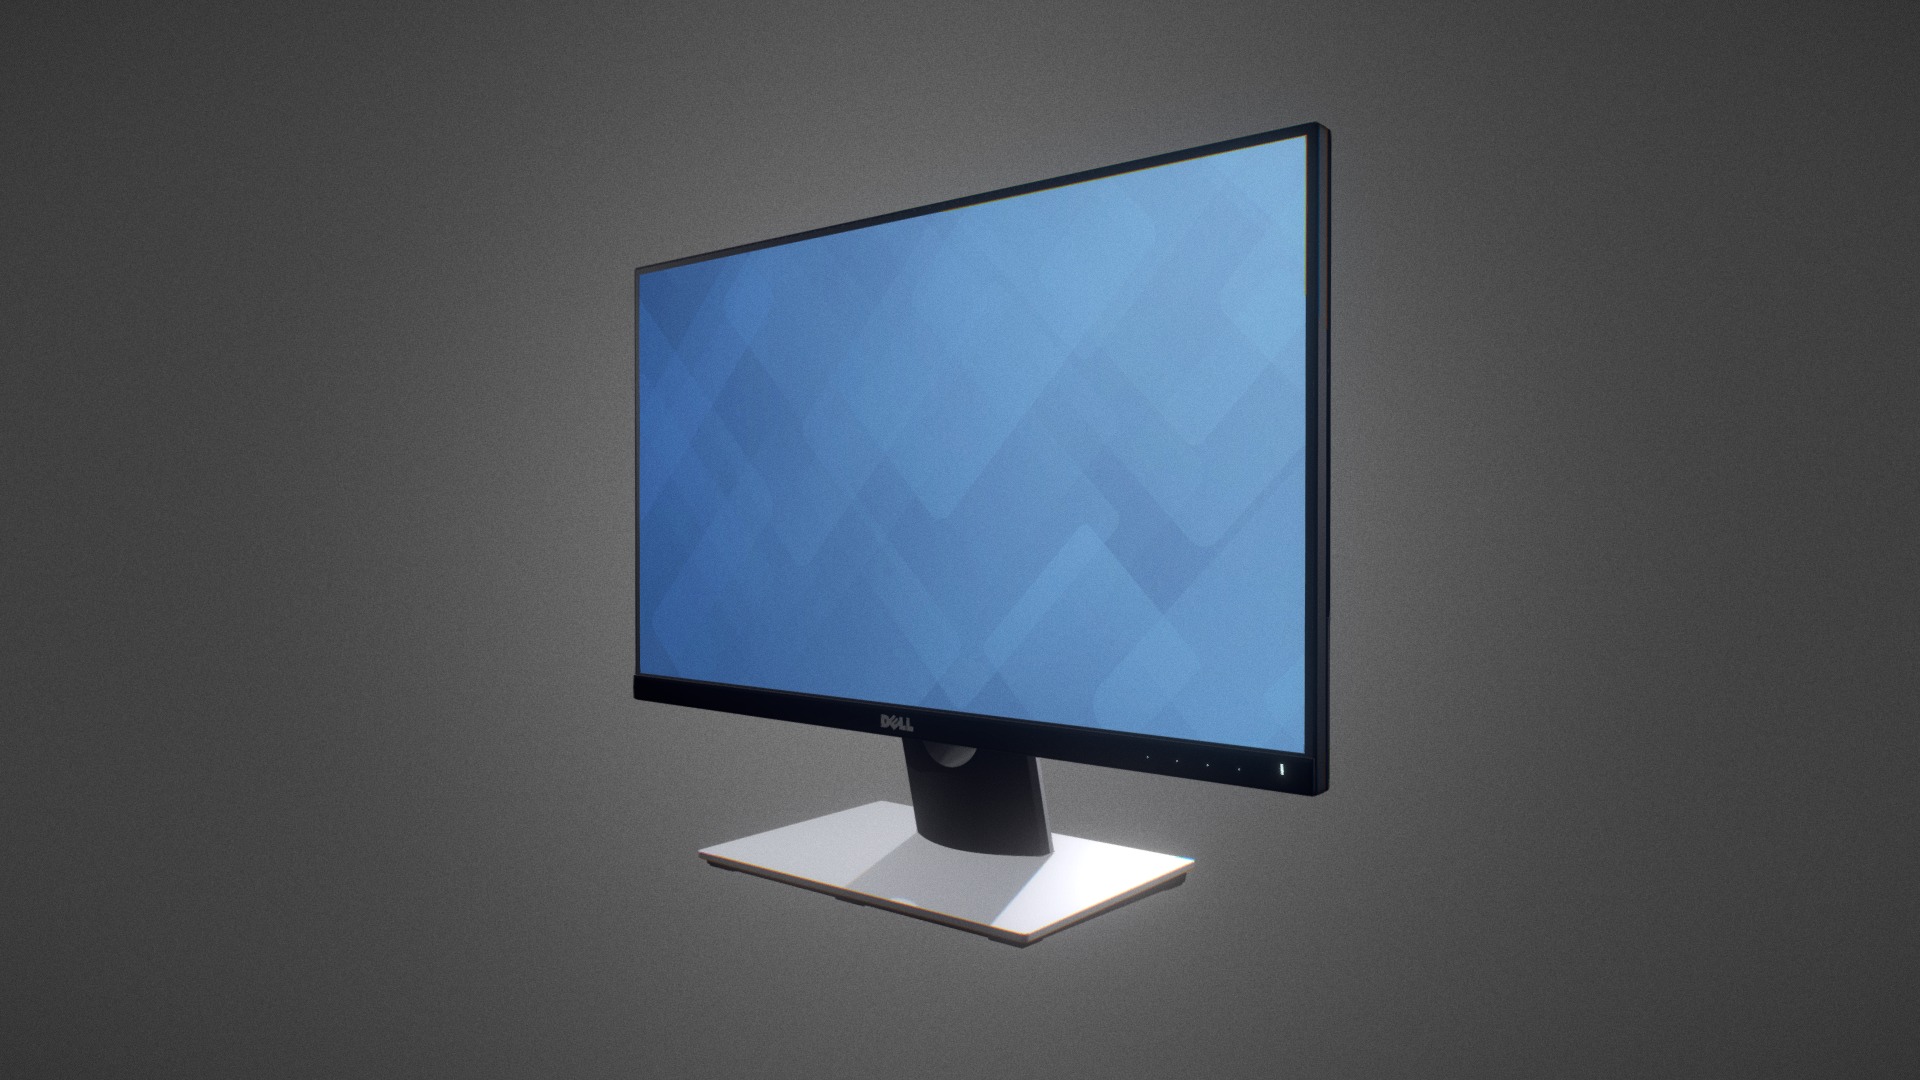 3D model Dell S2216H for Element 3D - This is a 3D model of the Dell S2216H for Element 3D. The 3D model is about a computer monitor with a blue screen.